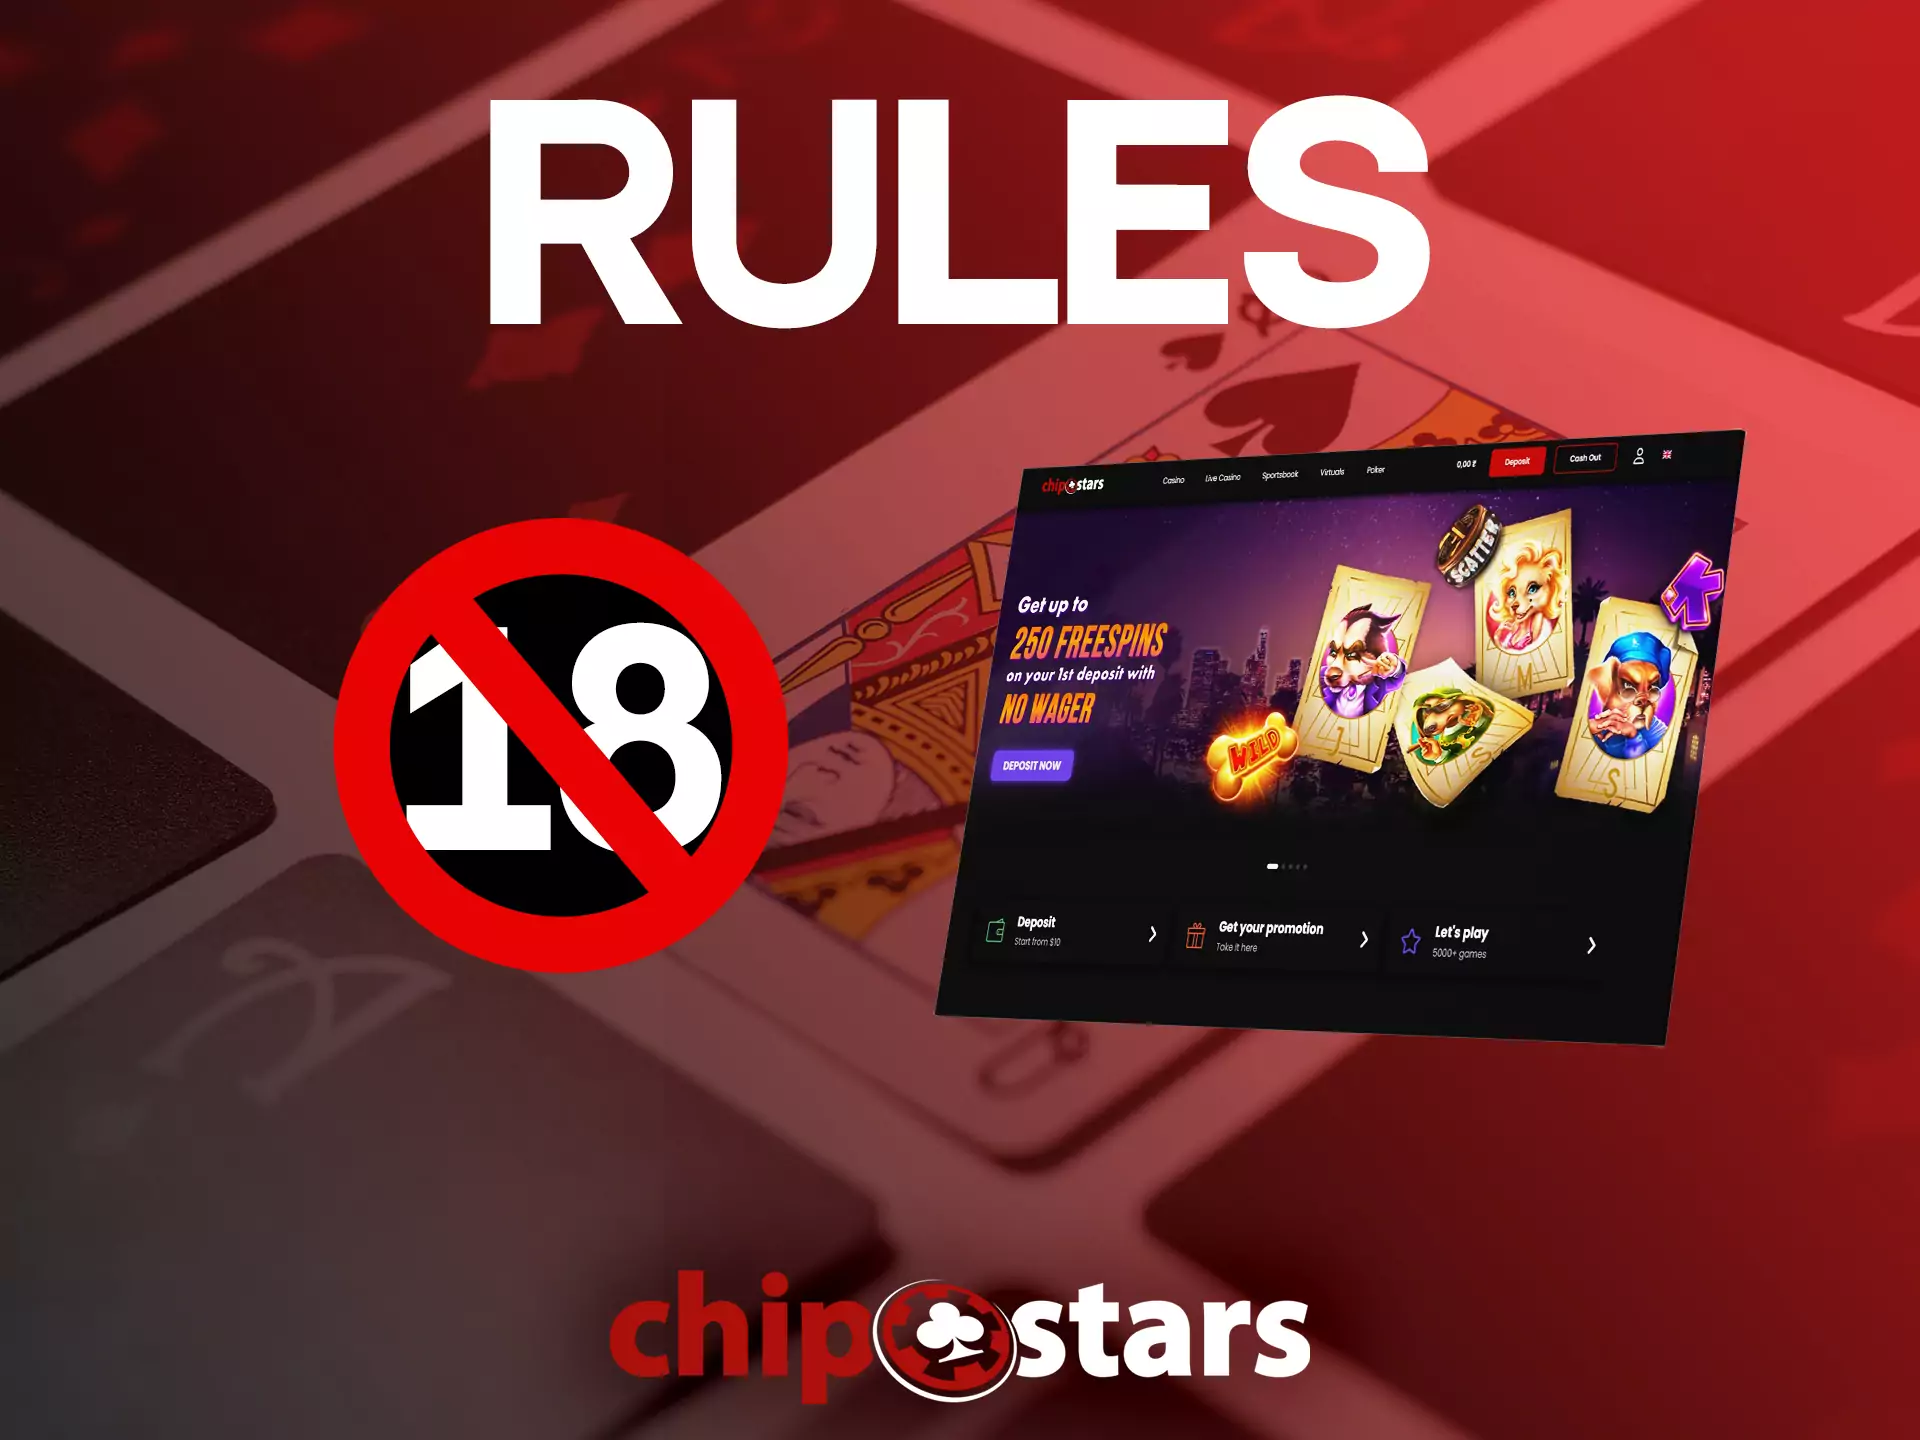 Follow the Chipstars rules and enjoy betting on the site.